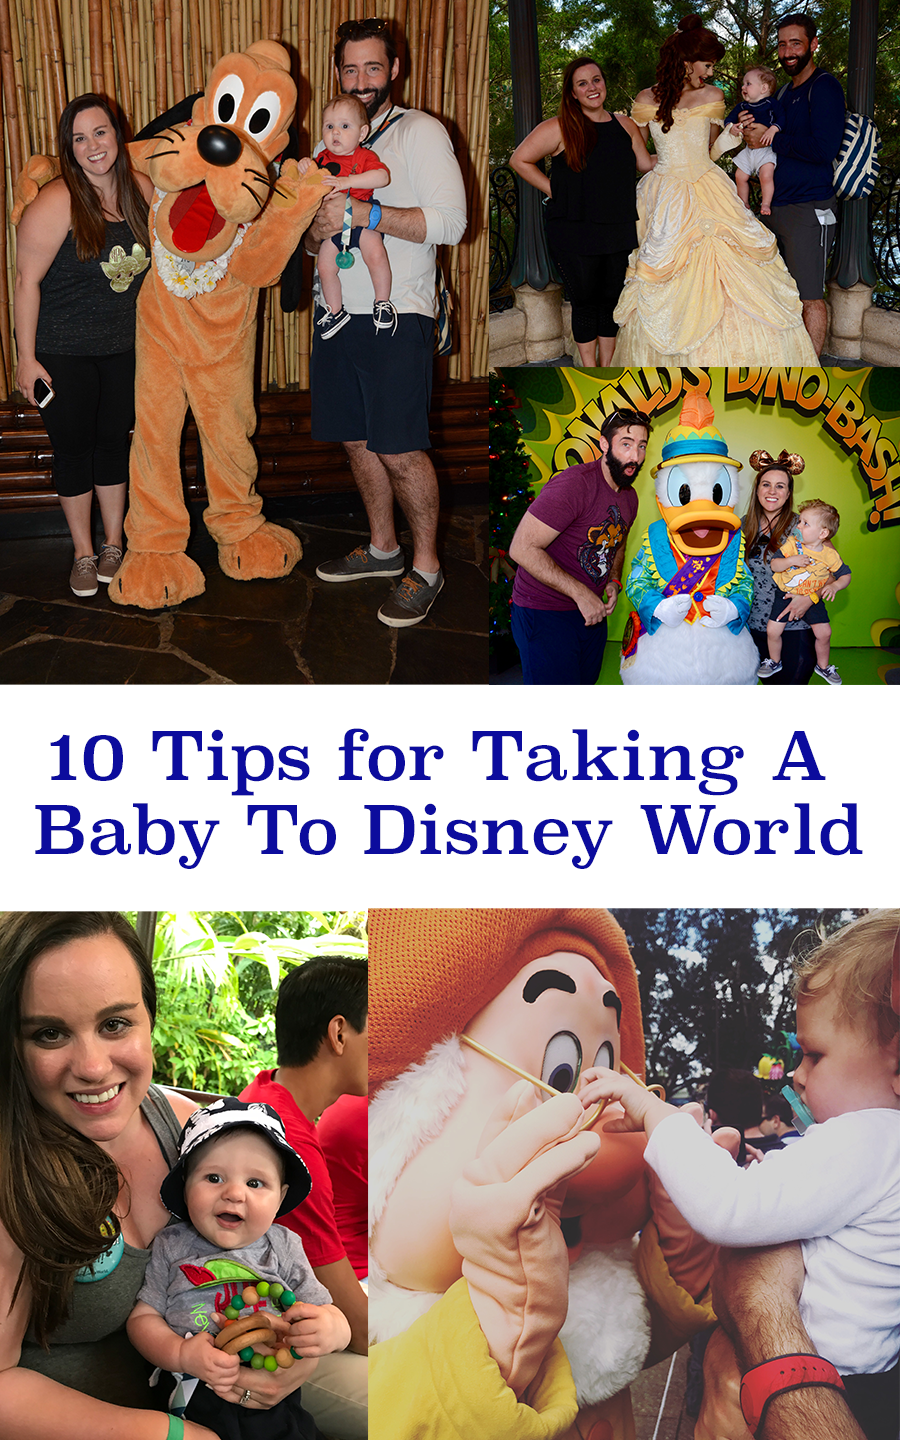 10 Tips for Taking a Baby to Disney World